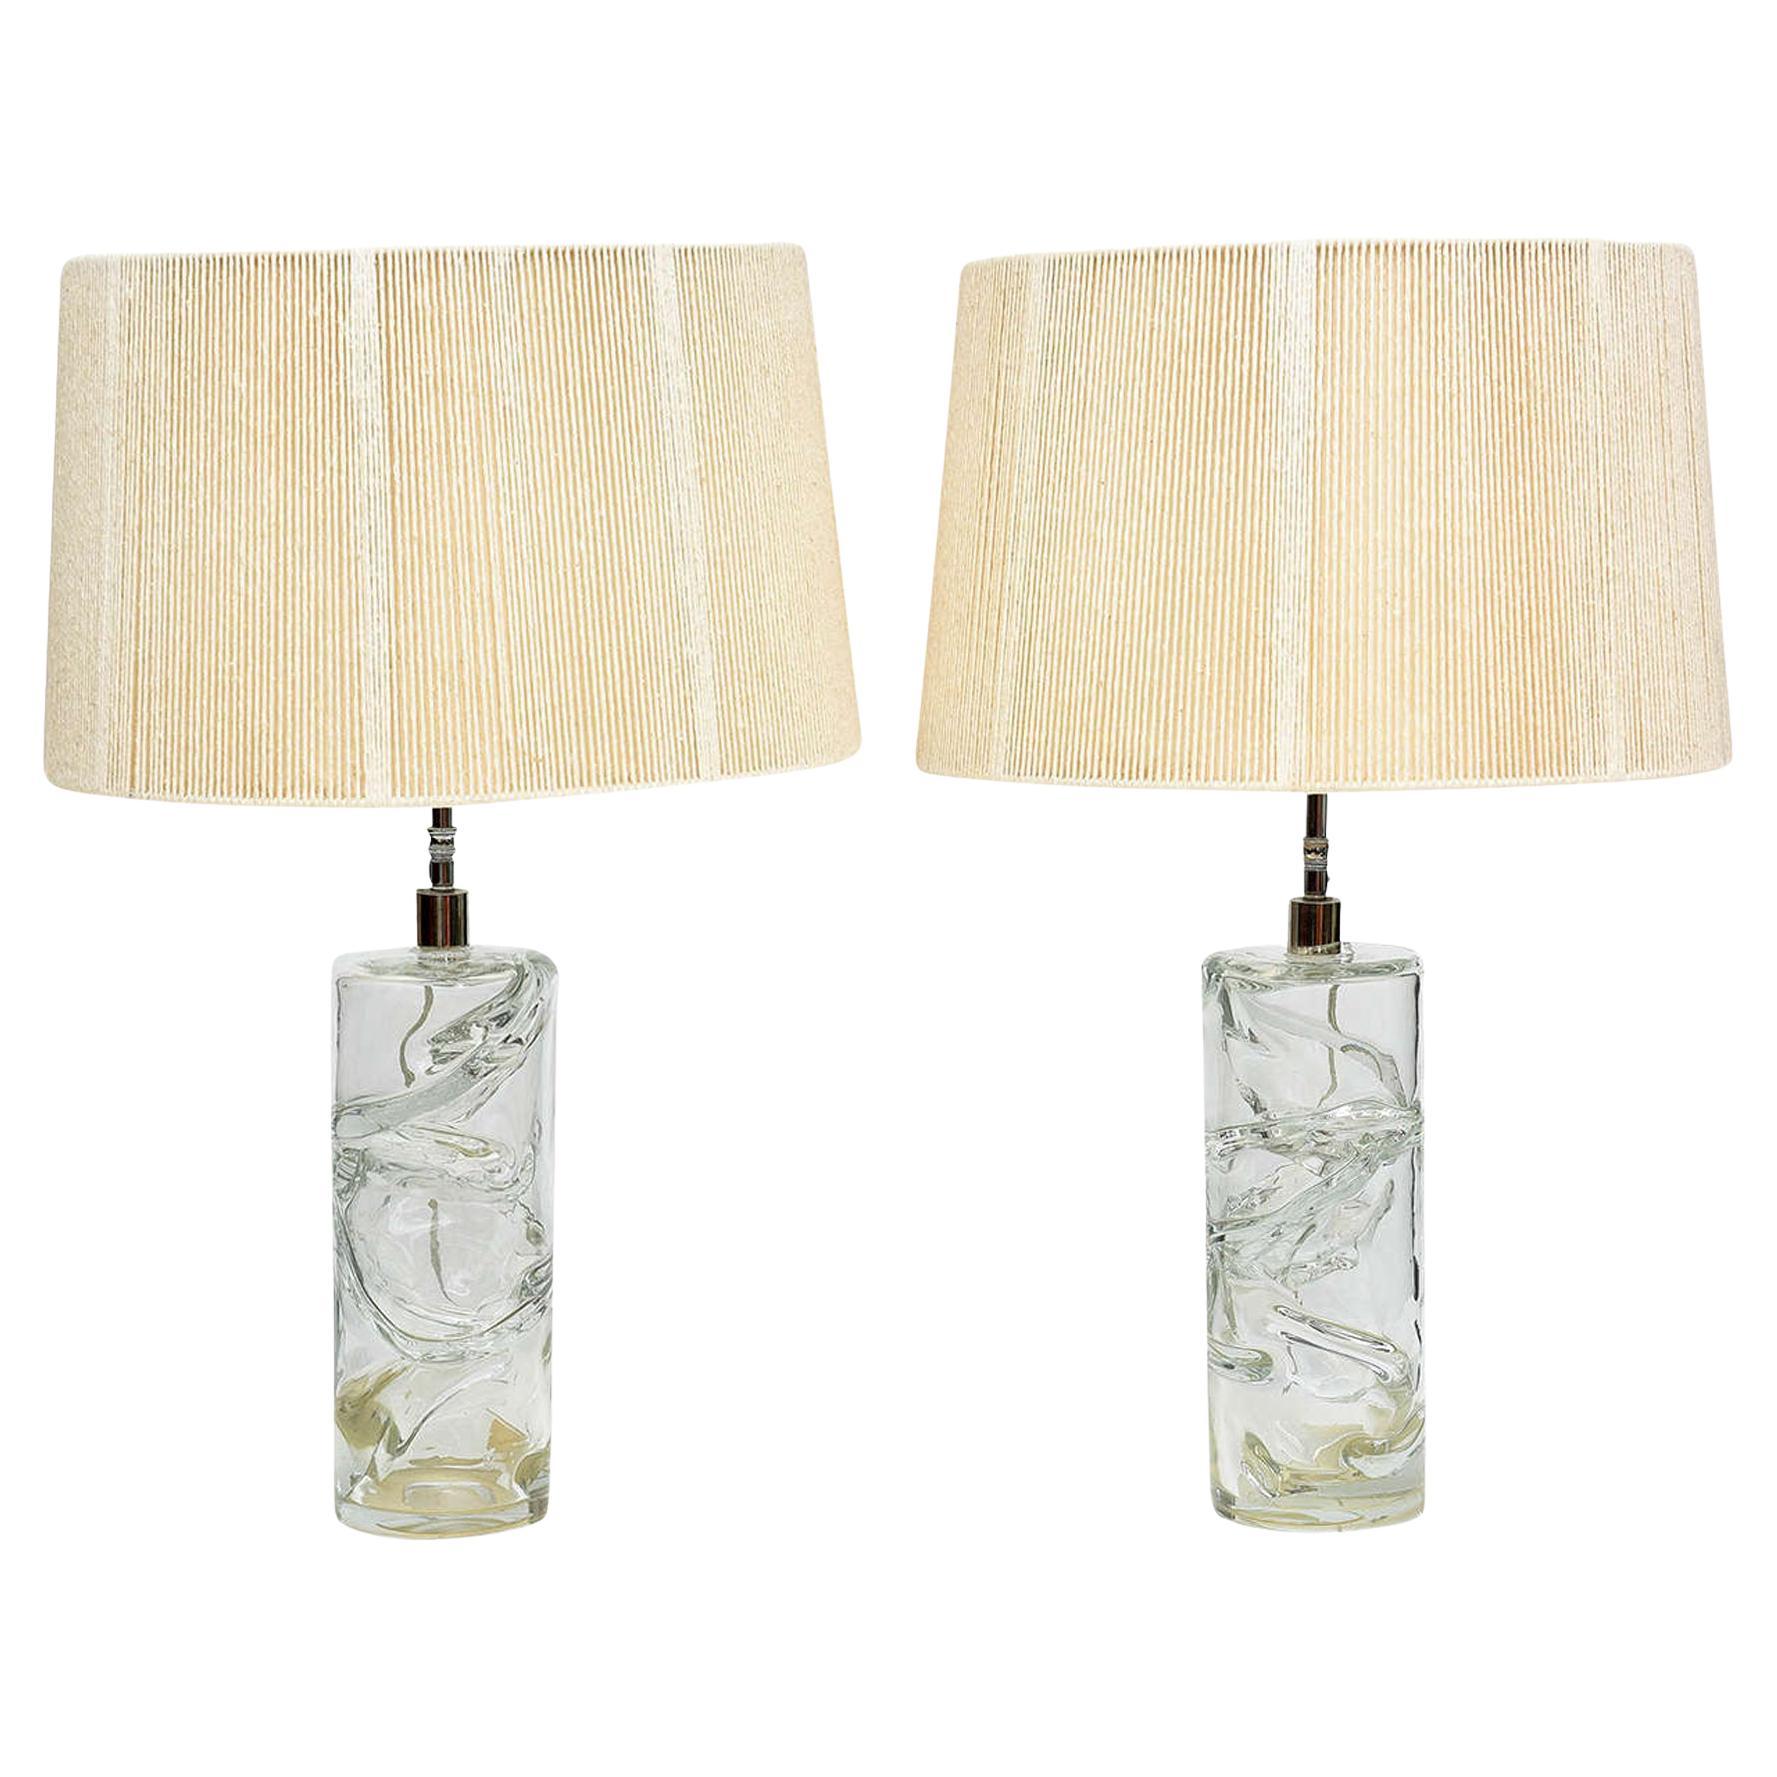 Pair Italian Modern Hand Blown Glass Table Lamps, Murano, 1950s For Sale